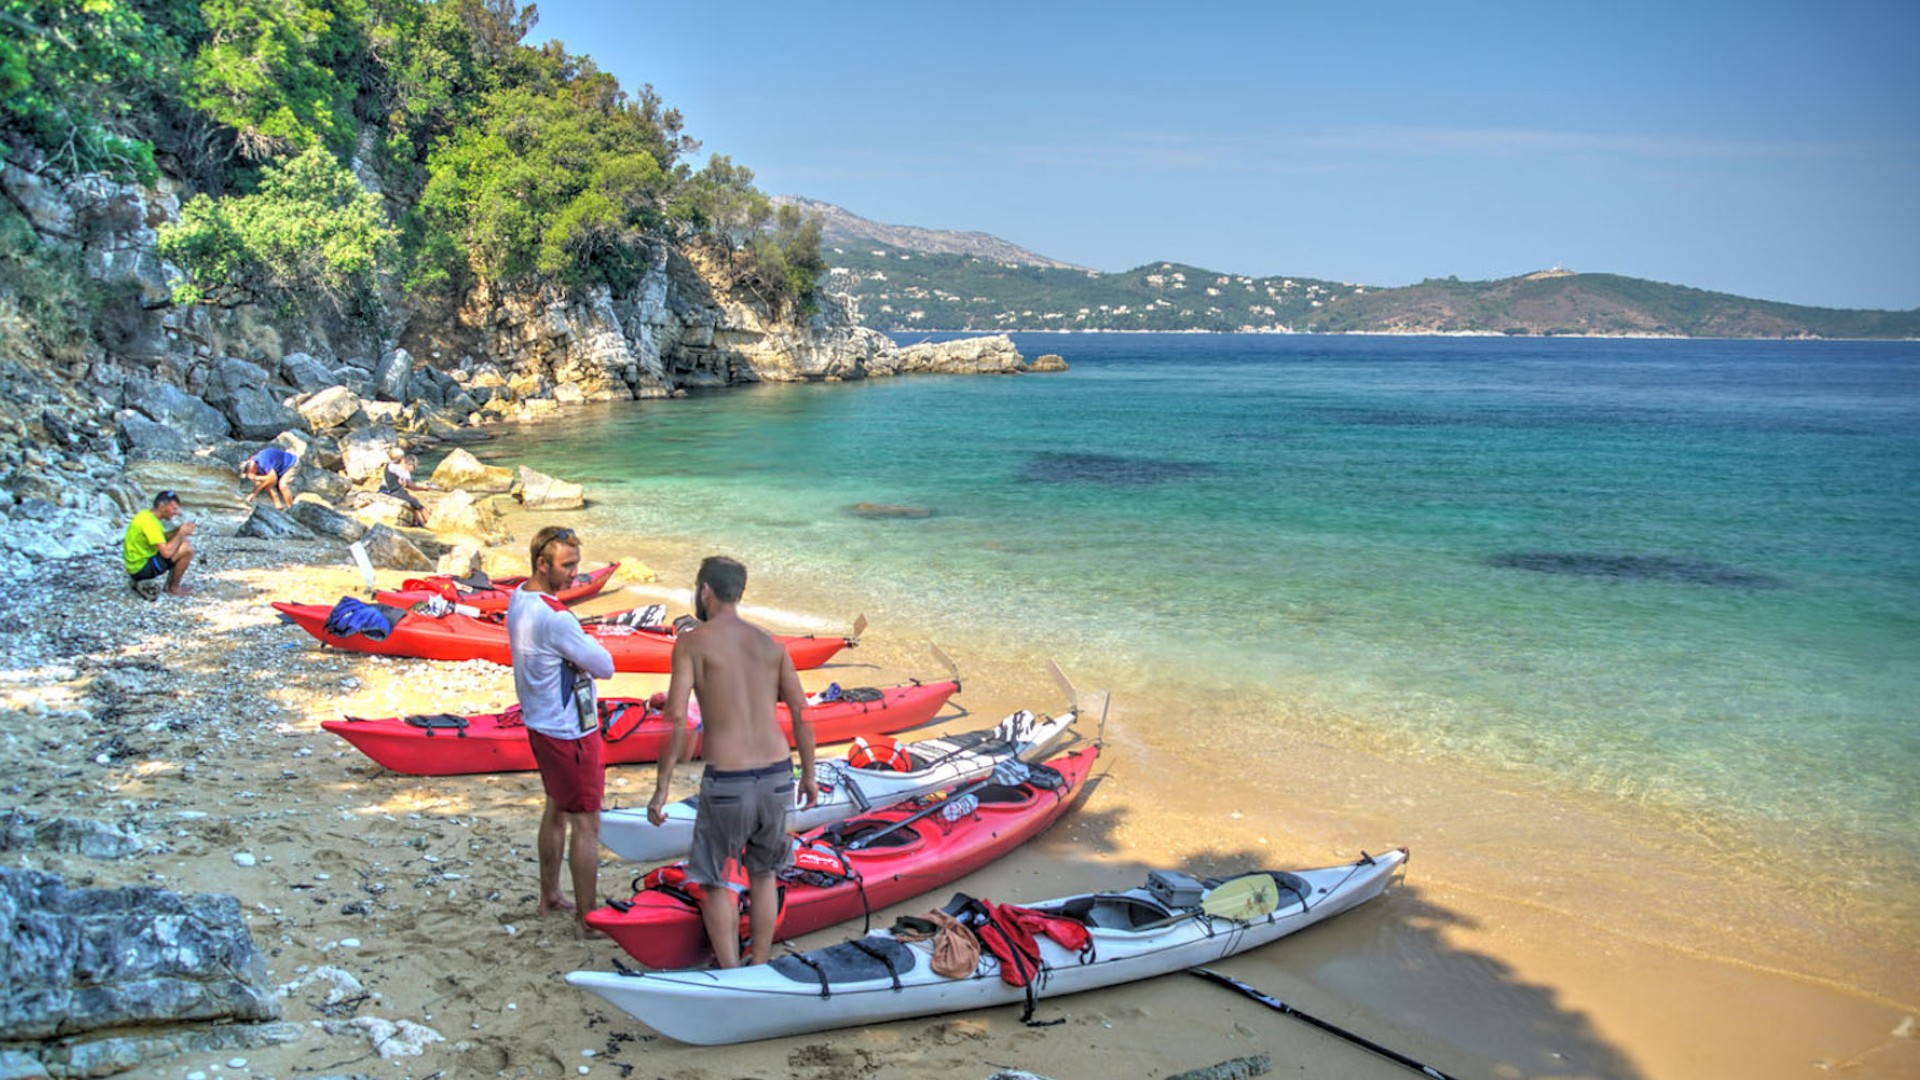 Sea kayaks pulled up on the shore on a rocky beach on a sunny day in Croatia